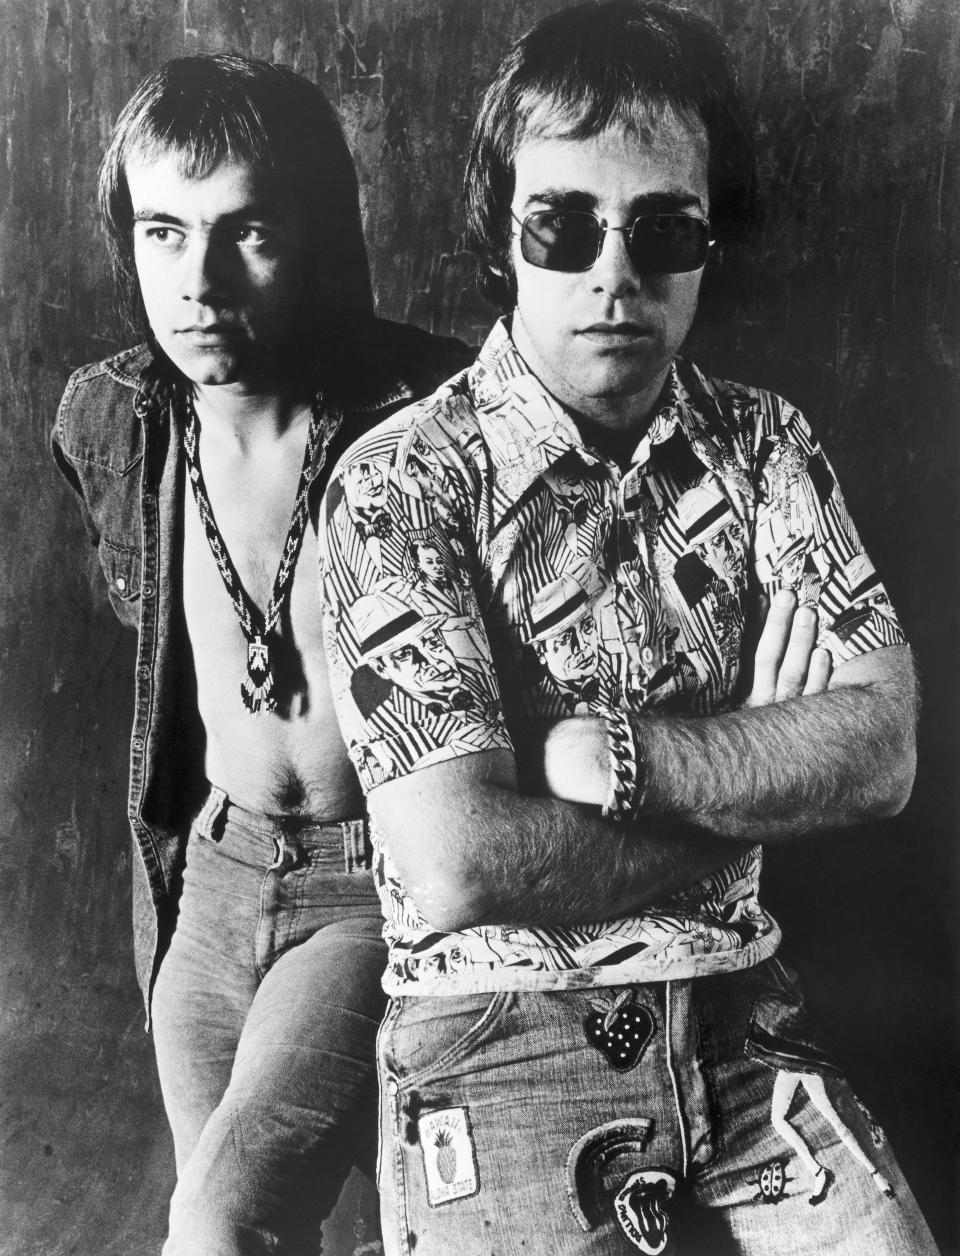 Bernie Taupin and Elton John in 1971. (Photo: Michael Ochs Archives/Getty Images)